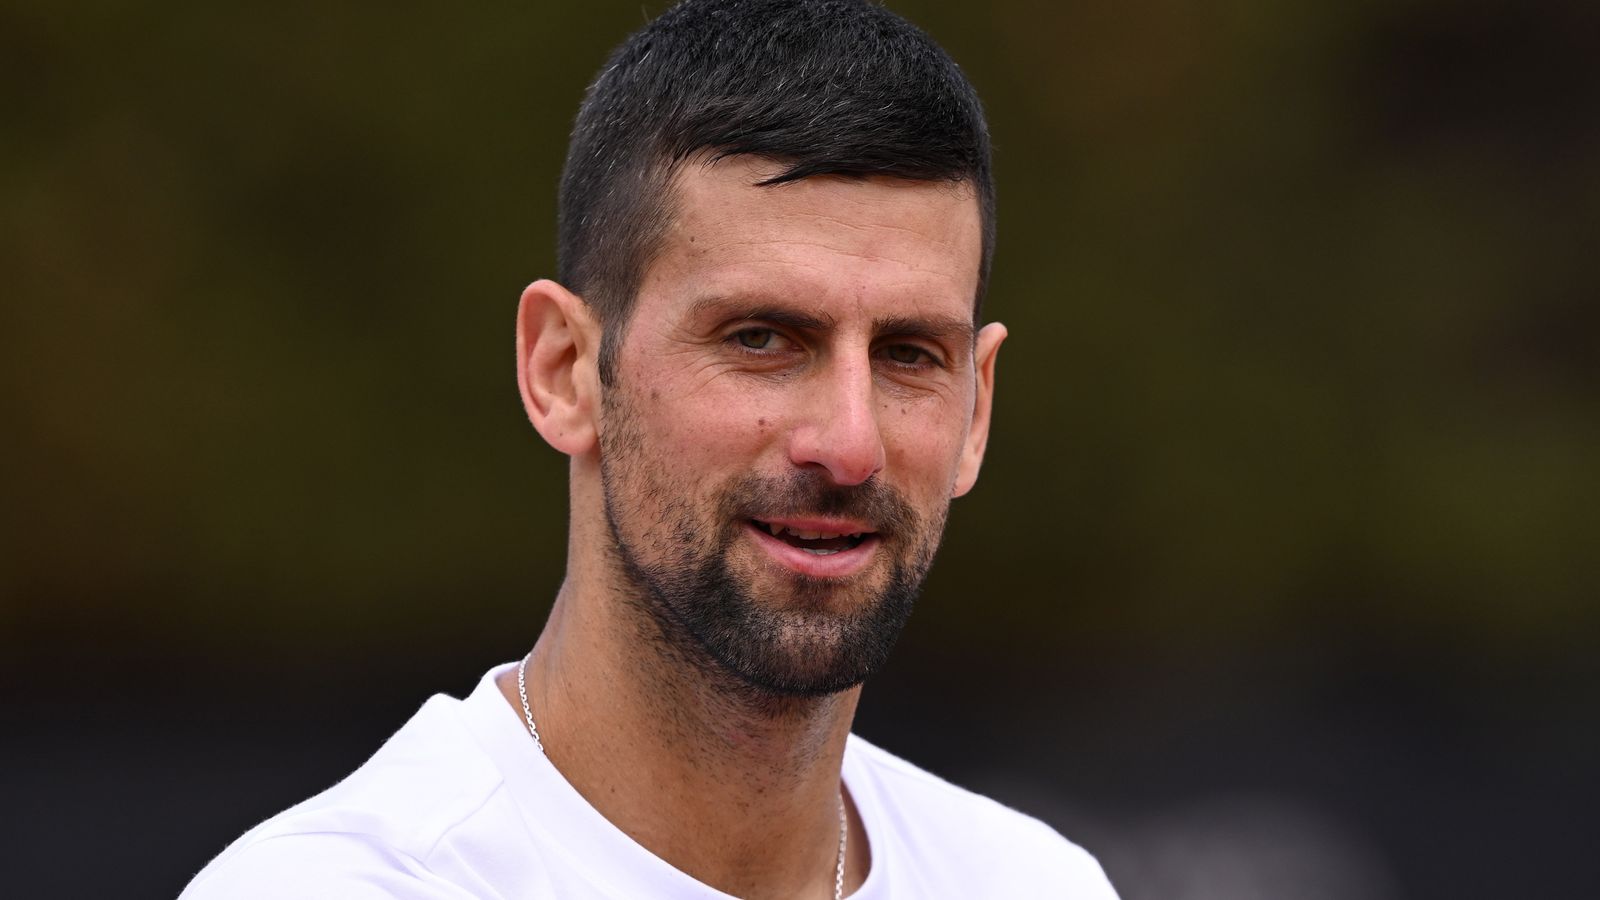 Novak Djokovic hoping to hit peak form for French Open, Wimbledon, Olympics and US Open stretch this summer